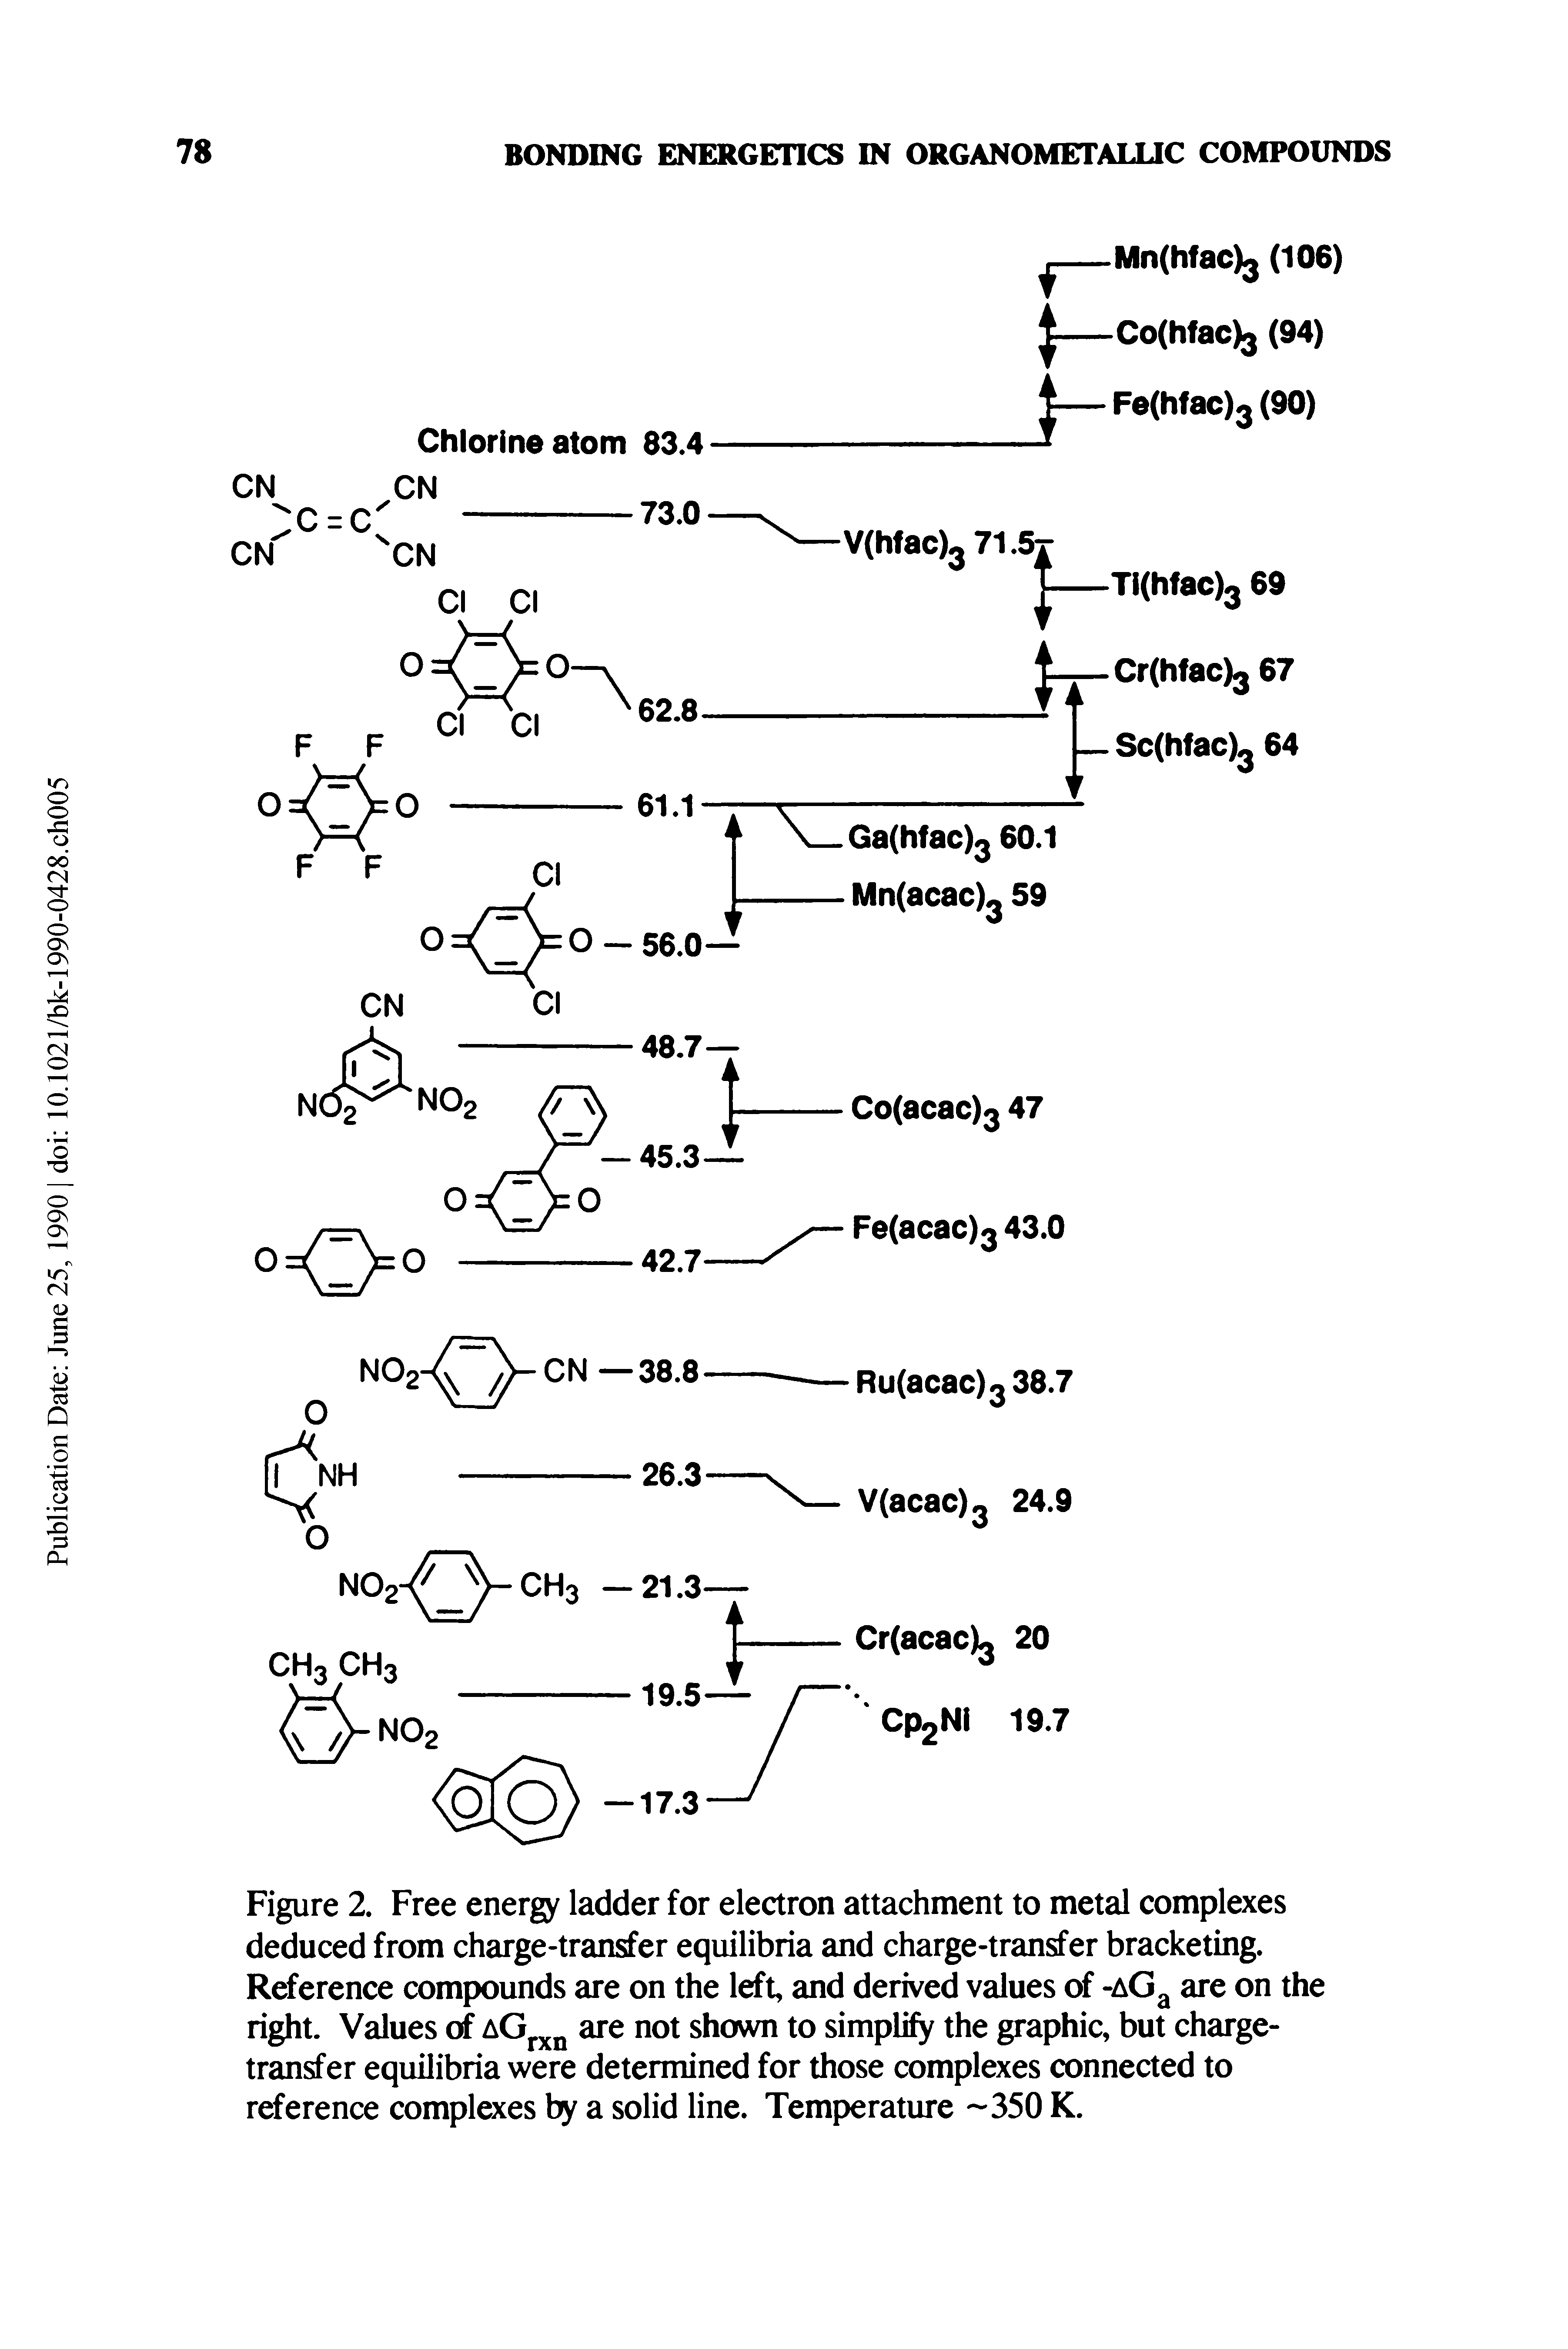 Figure 2. Free energy ladder for electron attachment to metal complexes deduced from charge-transfer equilibria and charge-transfer bracketing. Reference compounds are on the left, and derived values of -aG are on the right. Values (rf are not shown to simplify the graphic, but charge-transfer equilibria were determined for those complexes connected to reference complexes by a solid line. Temperature -350 K.